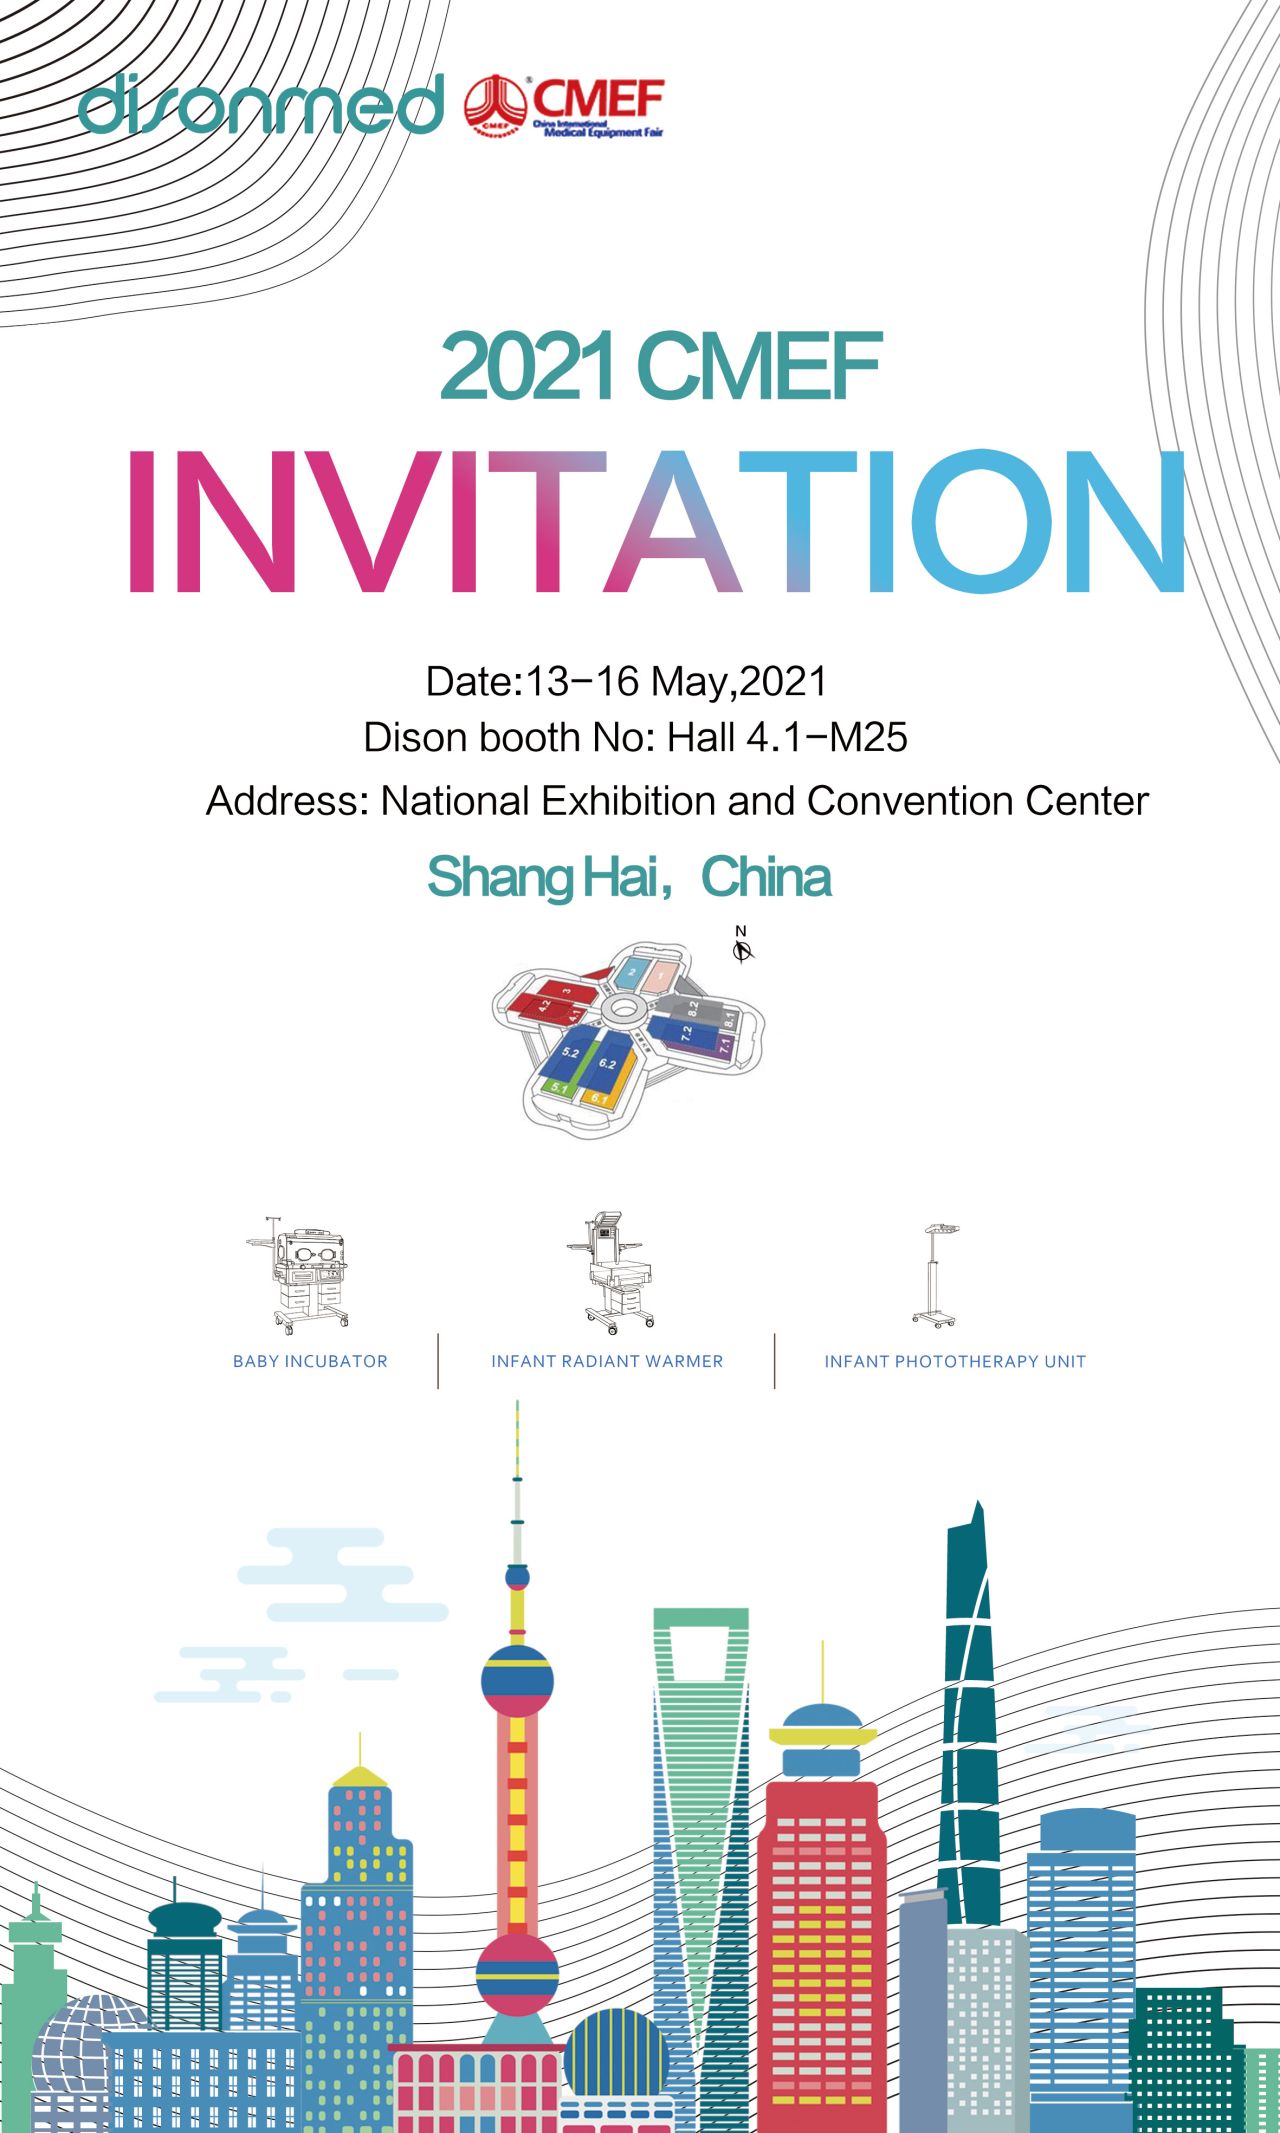 China International Medical Equipment Fair ( #CMEF) will be held in Shanghai during May 13-16, 2021 Welcome to DISON booth: Hall 4.1-M25